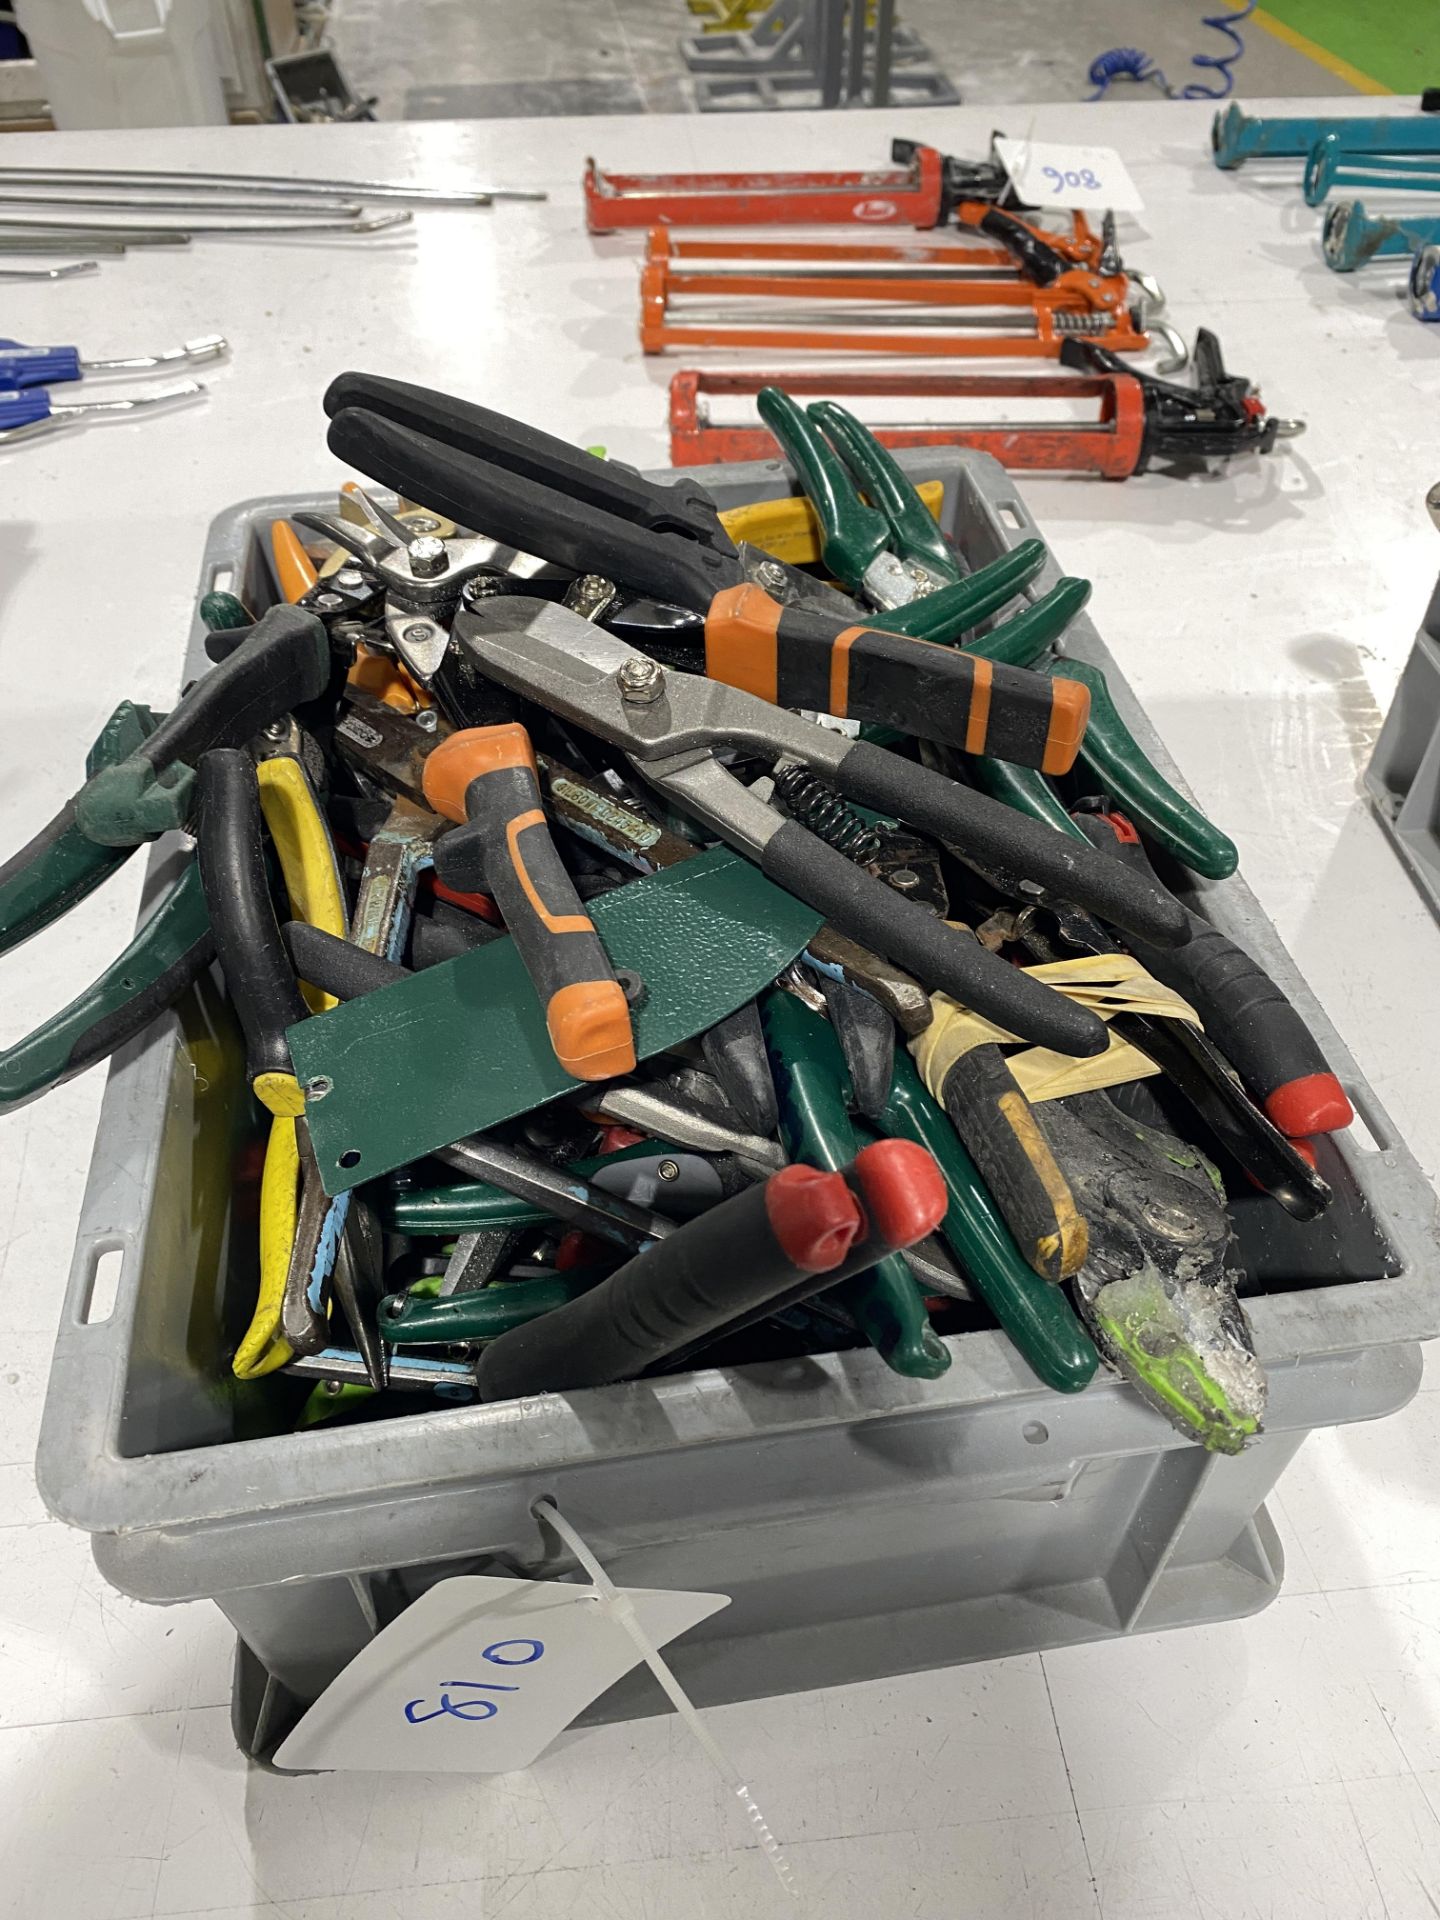 Large Qty Of Hand tools In Box